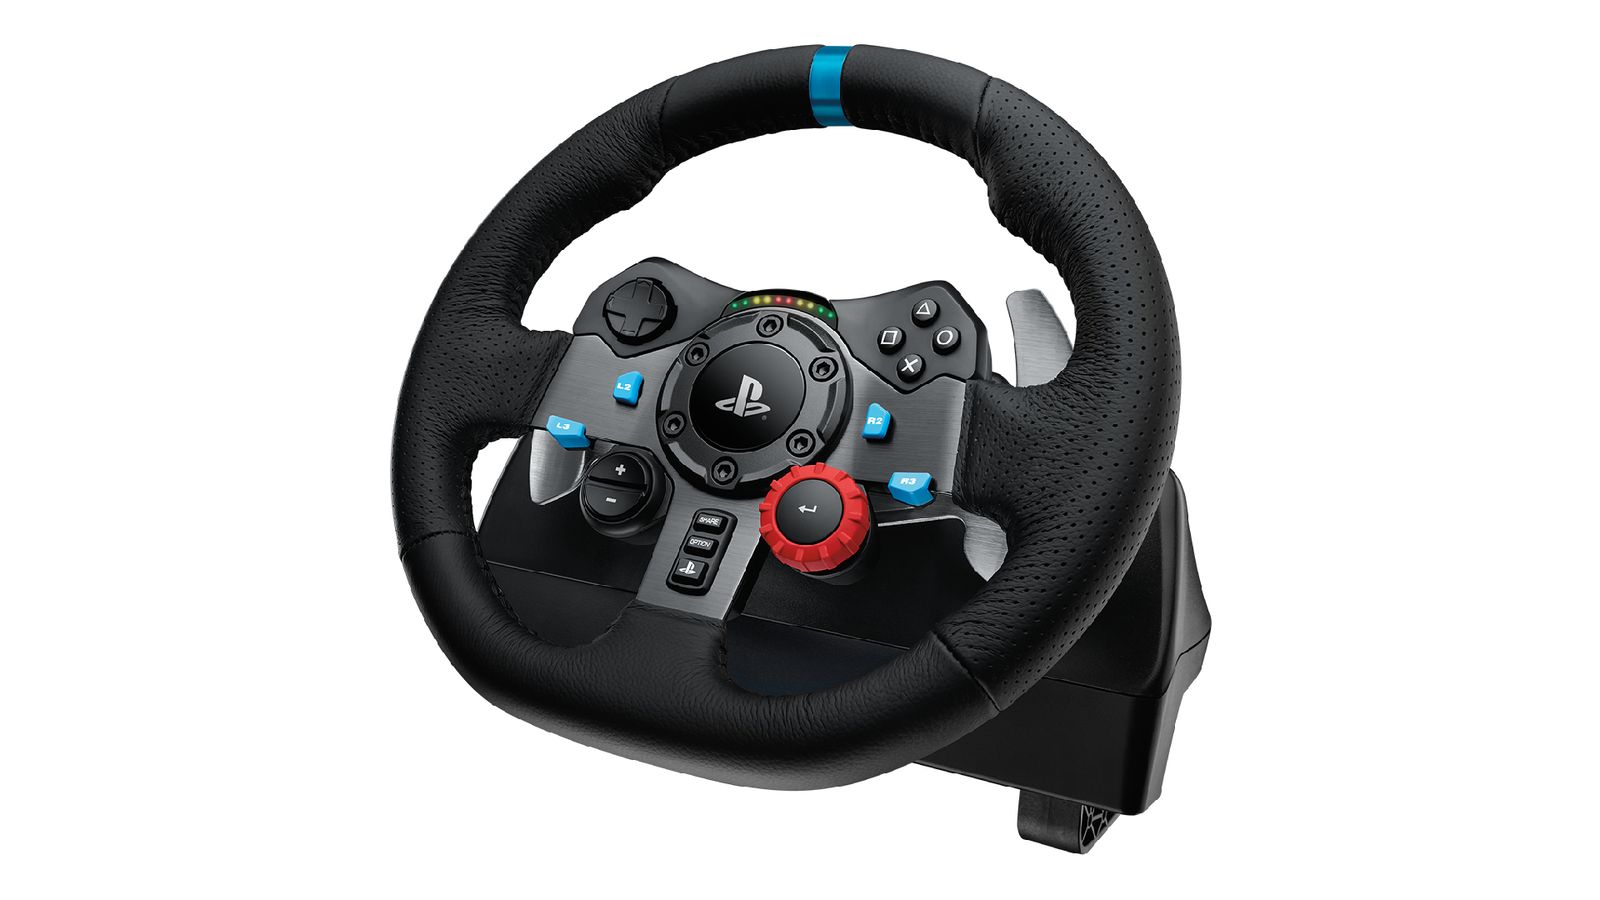 Logitech G G29 product image of a black racing wheel feature blue outlined buttons and a red dial on the face.